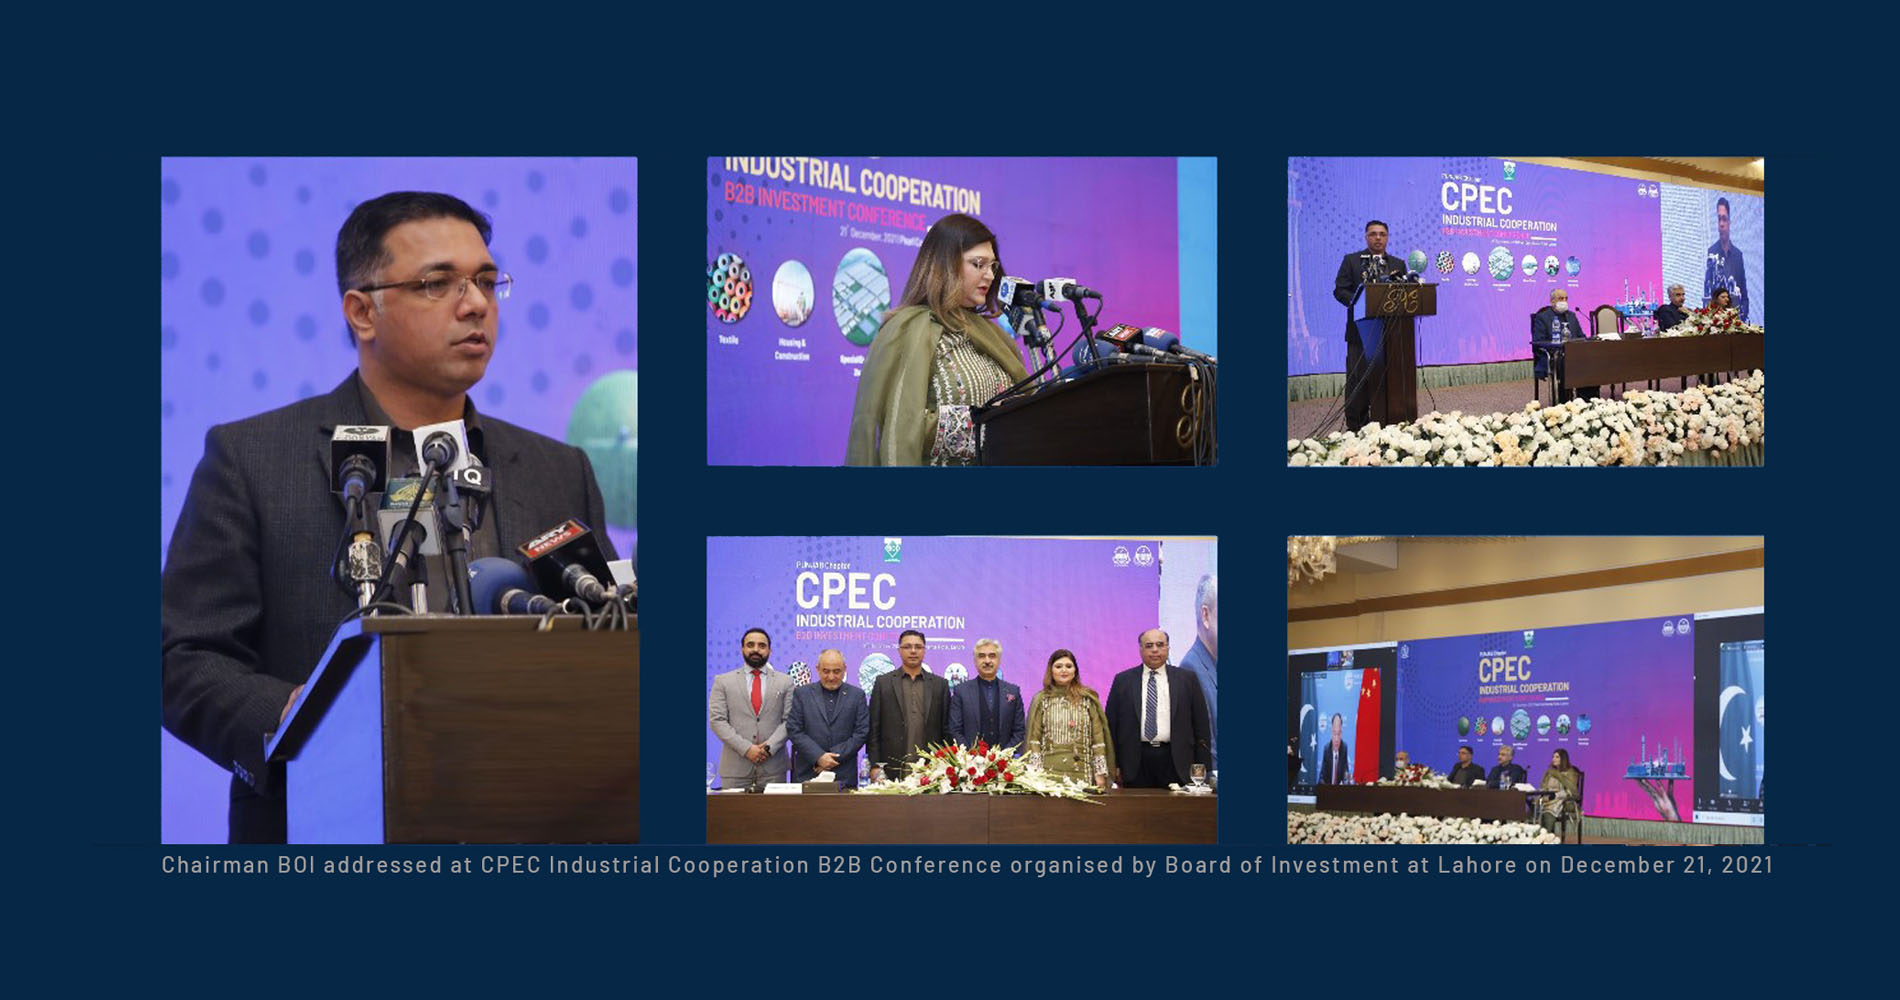 CPEC INDUSTRIAL COOPERATION B2B INVESTMENT CONFERENCE, Lahore